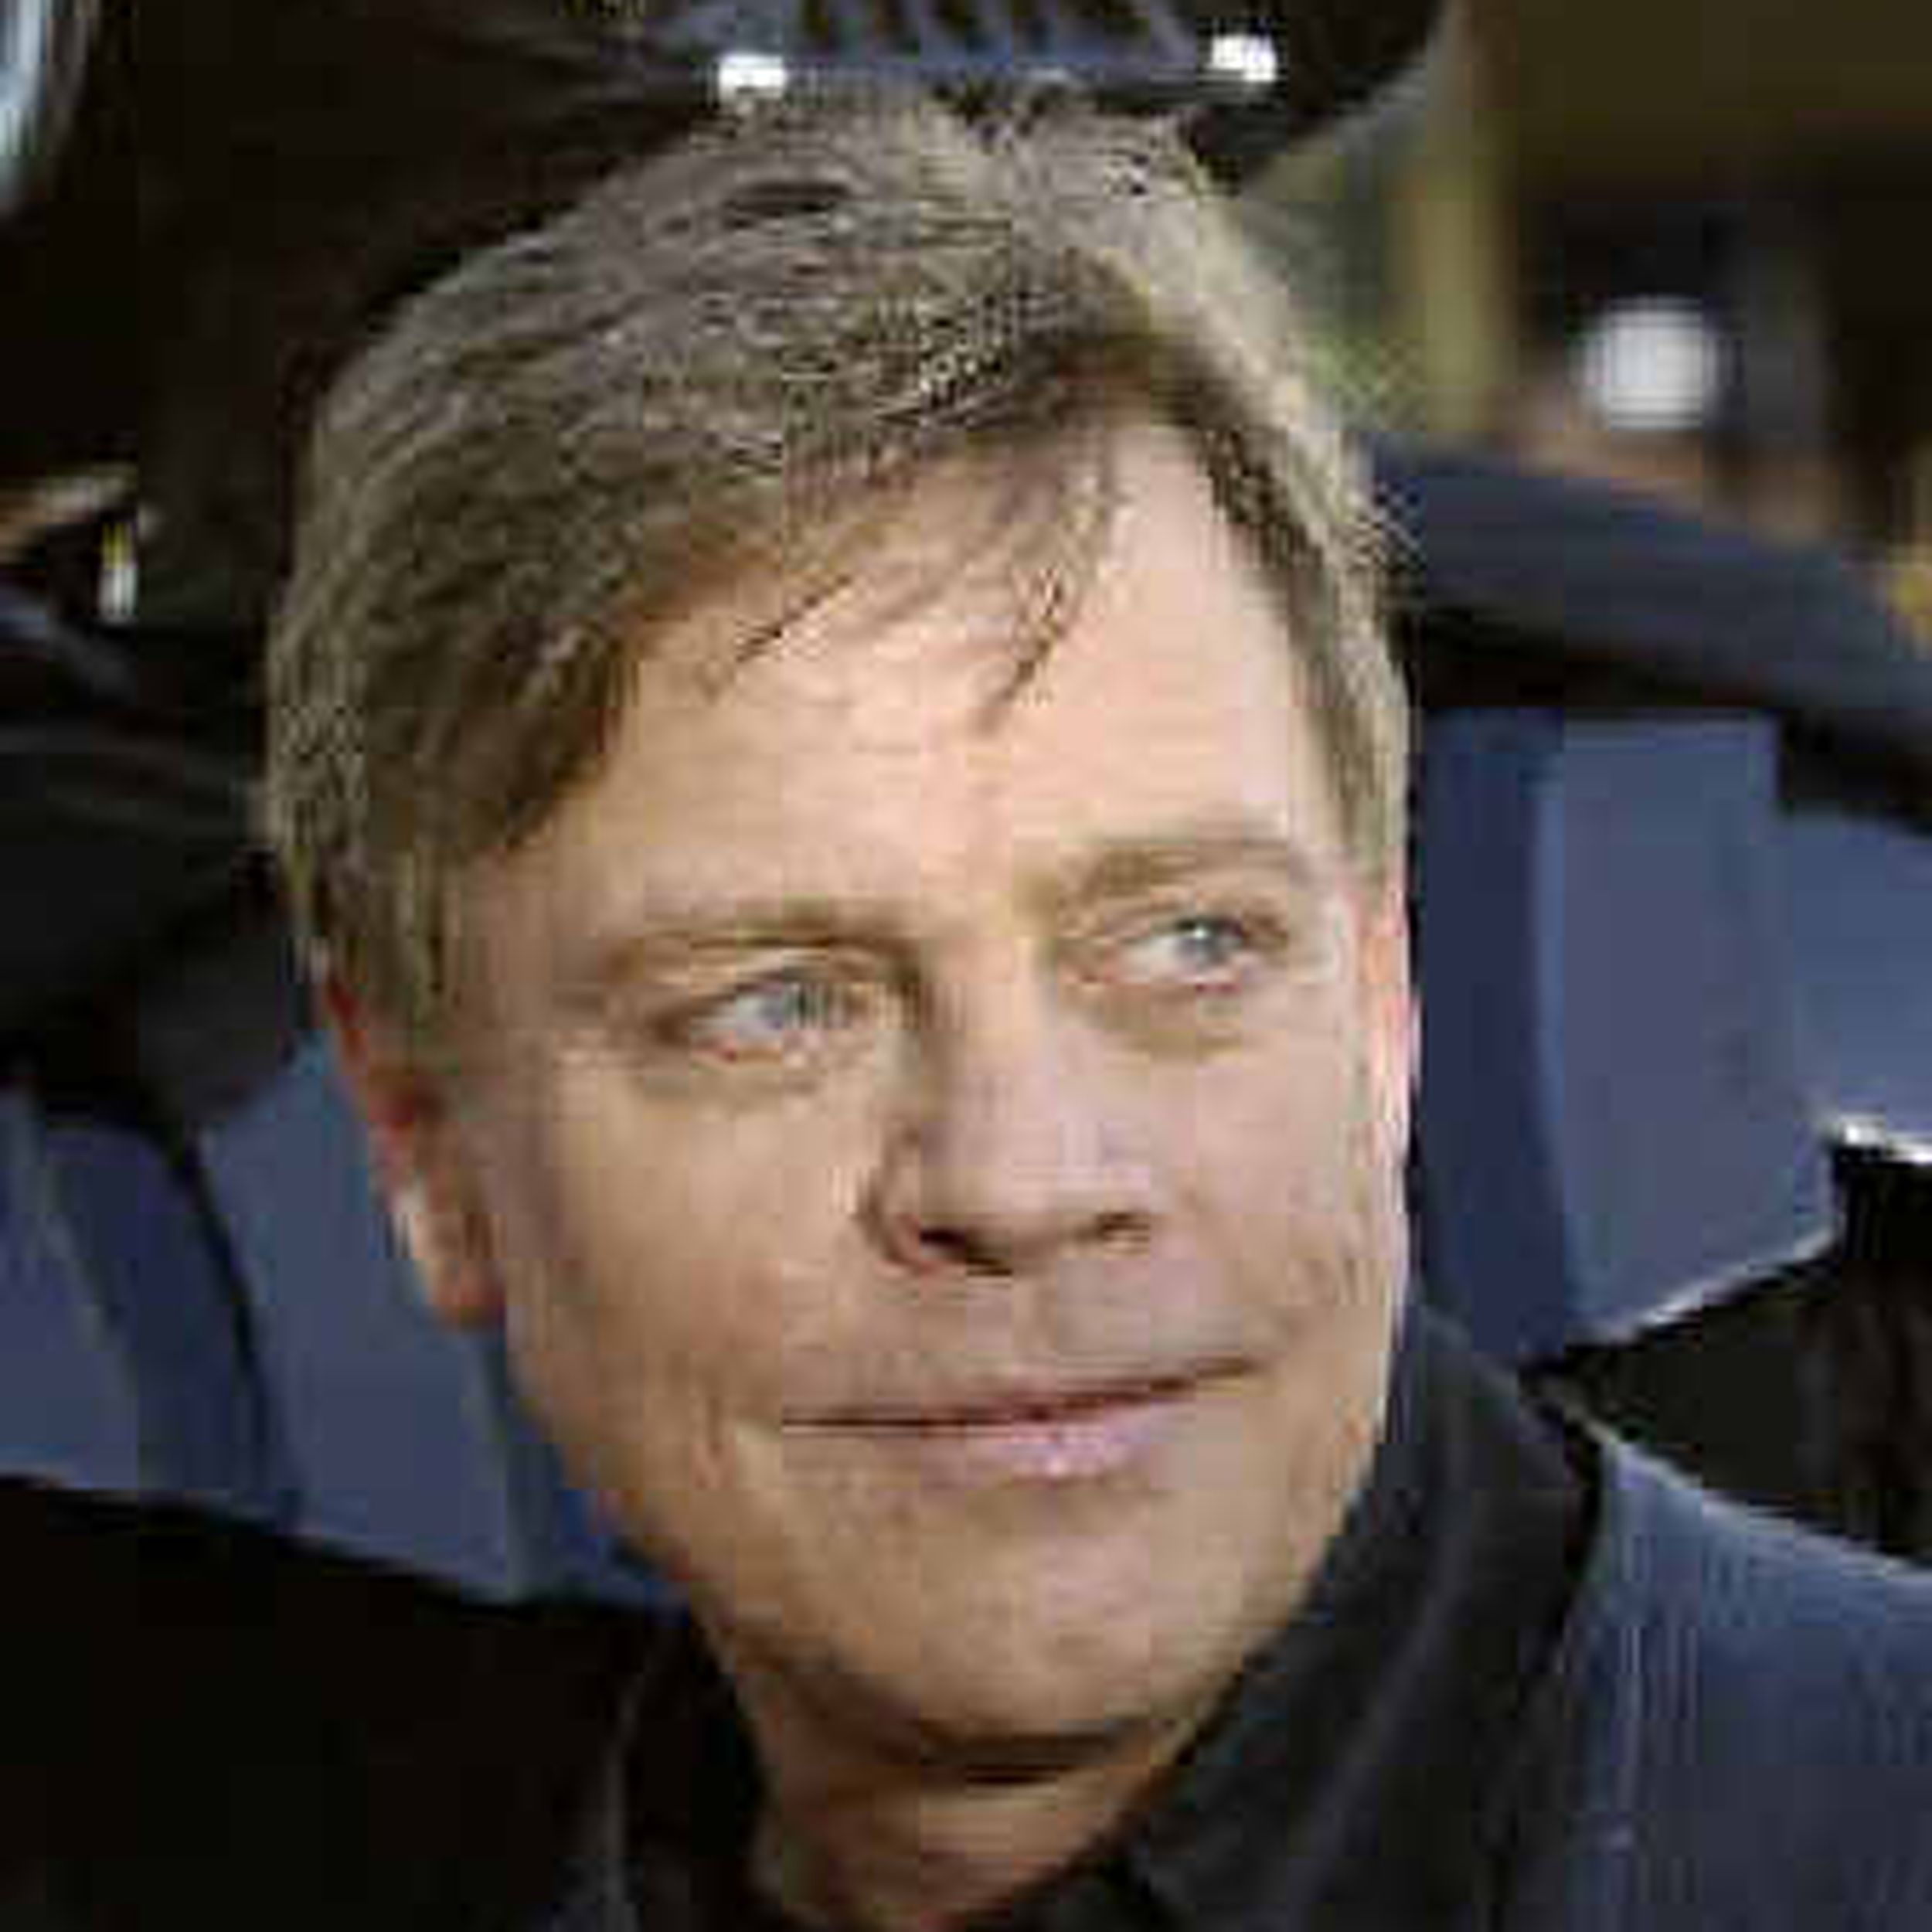 Mark Hamill - latest news, breaking stories and comment - The